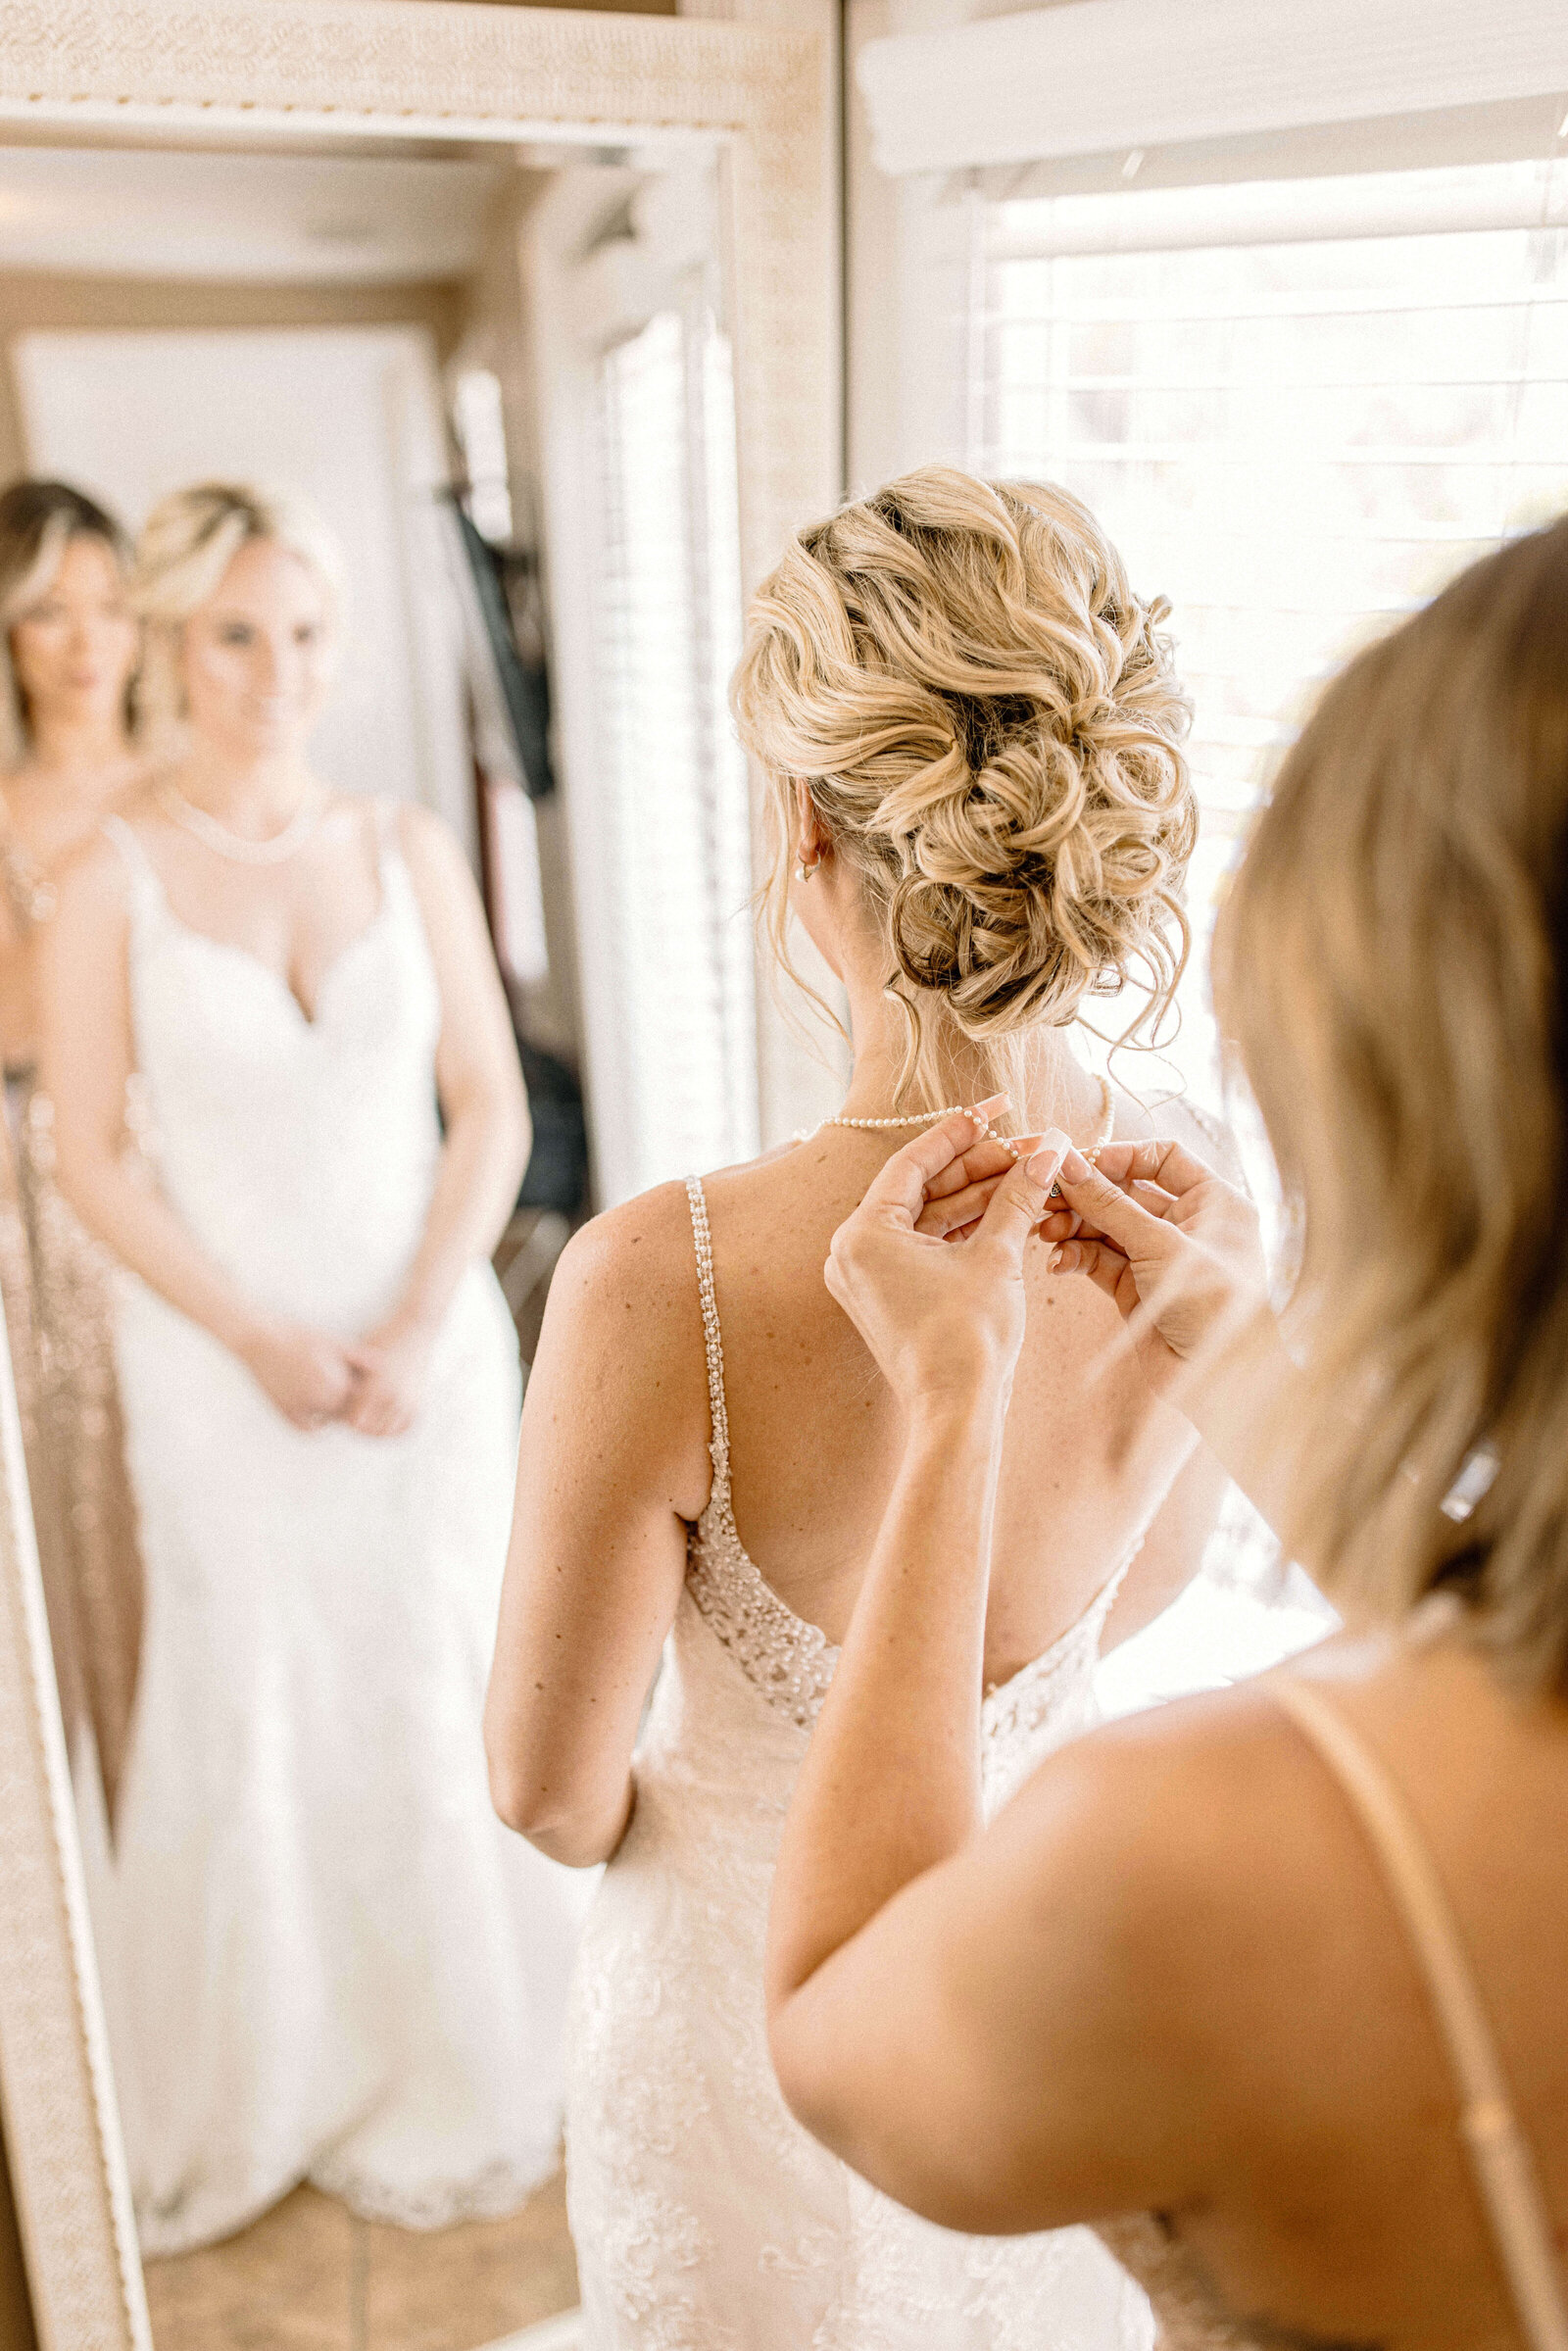 bridesmaid putting on brides necklace in getting ready suite by delaware wedding photographer sabrina leigh